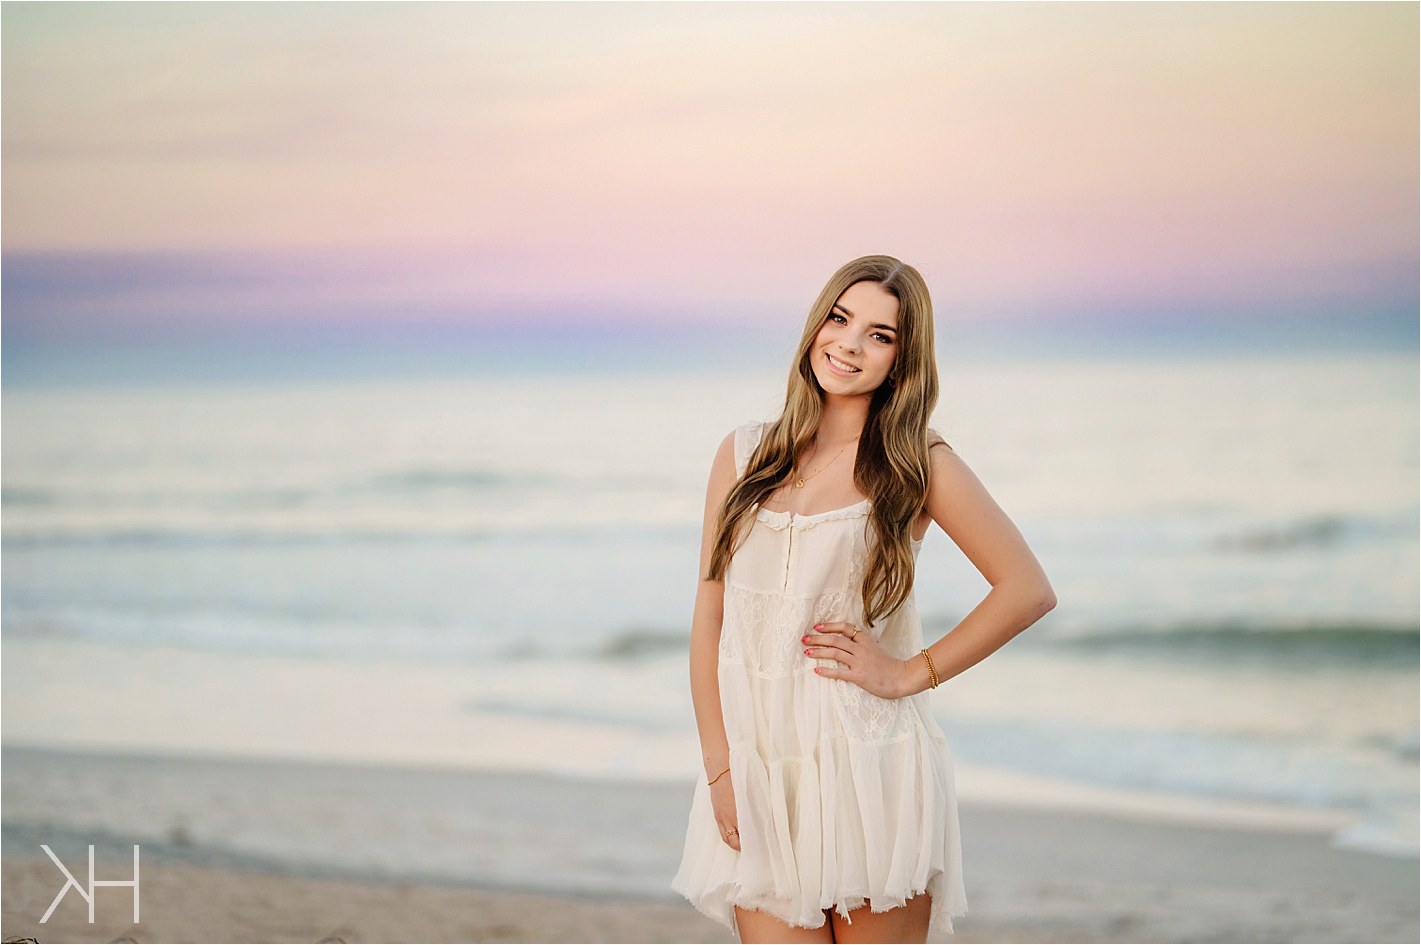 Senior portrait by the beach at sunset